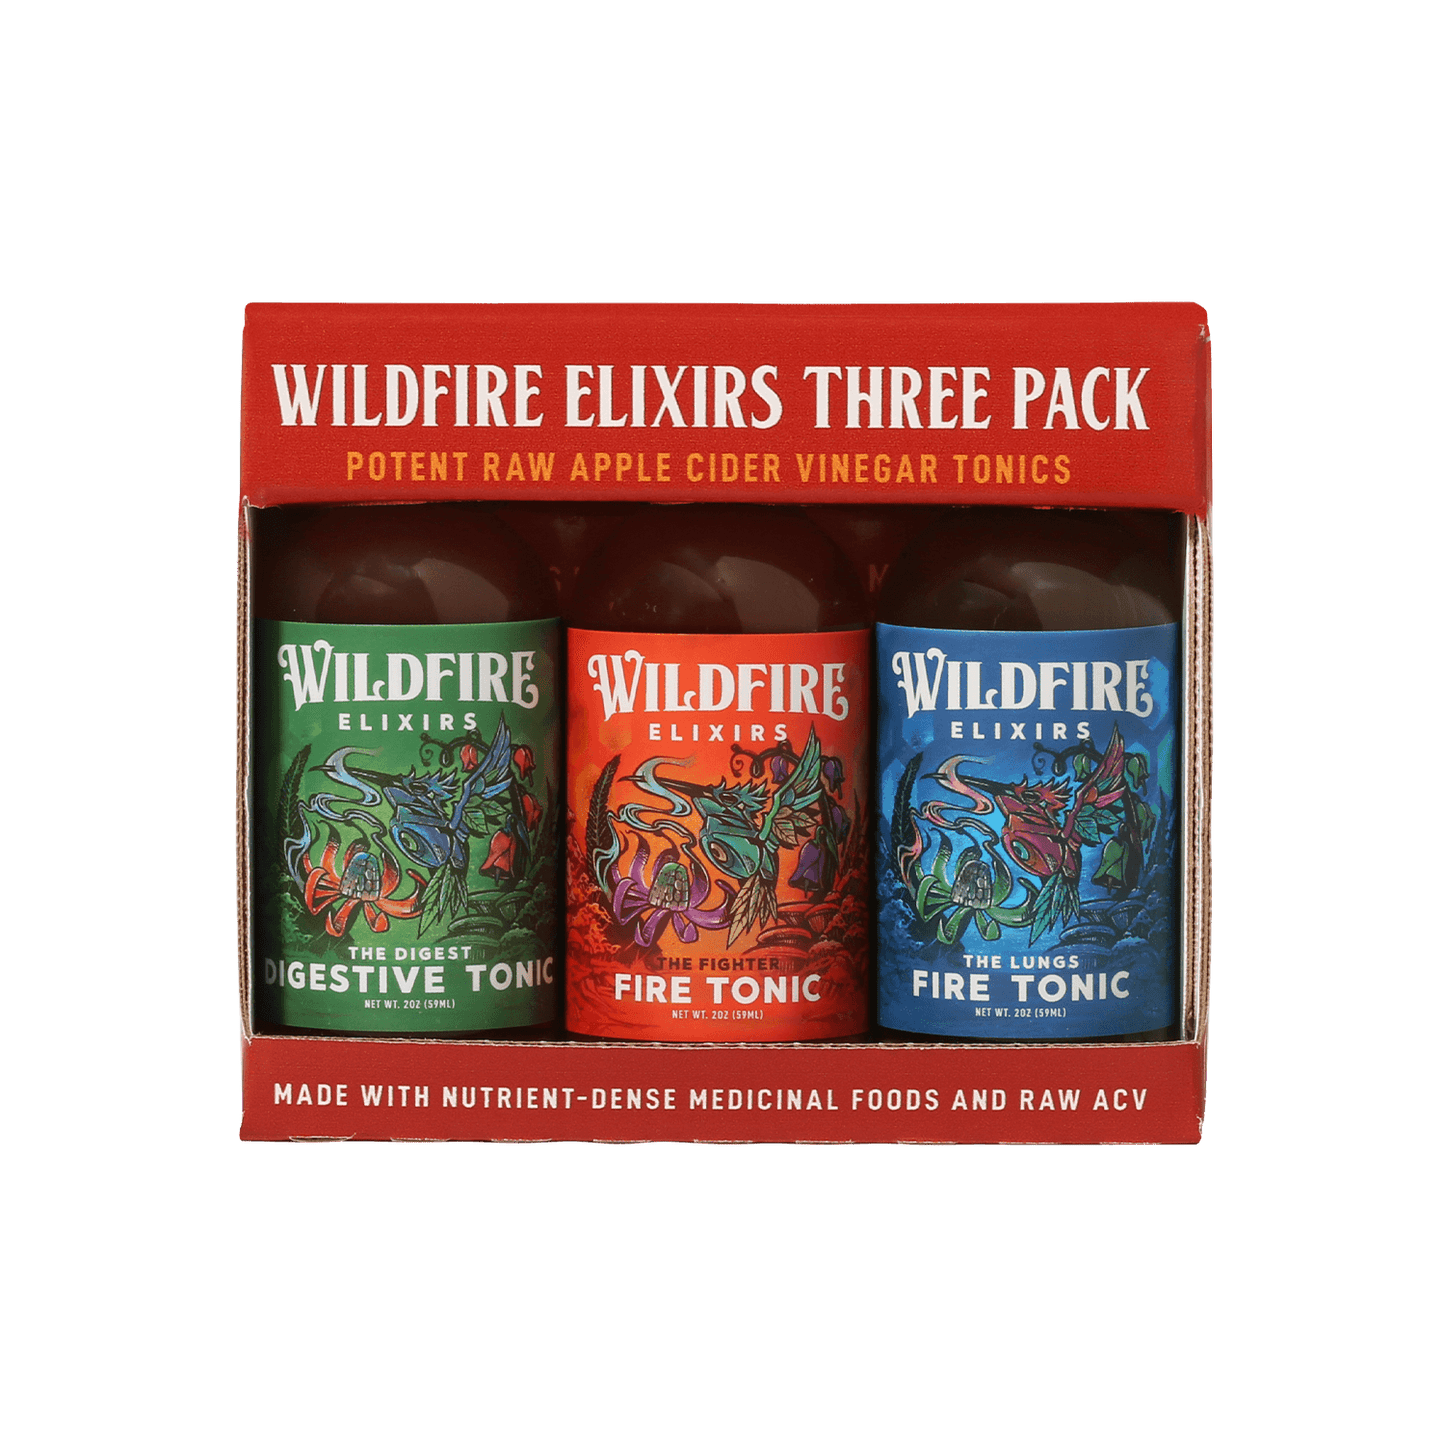 Wildfire Elixirs - Whole Body Health 3-Pack of 2oz wellness tonics